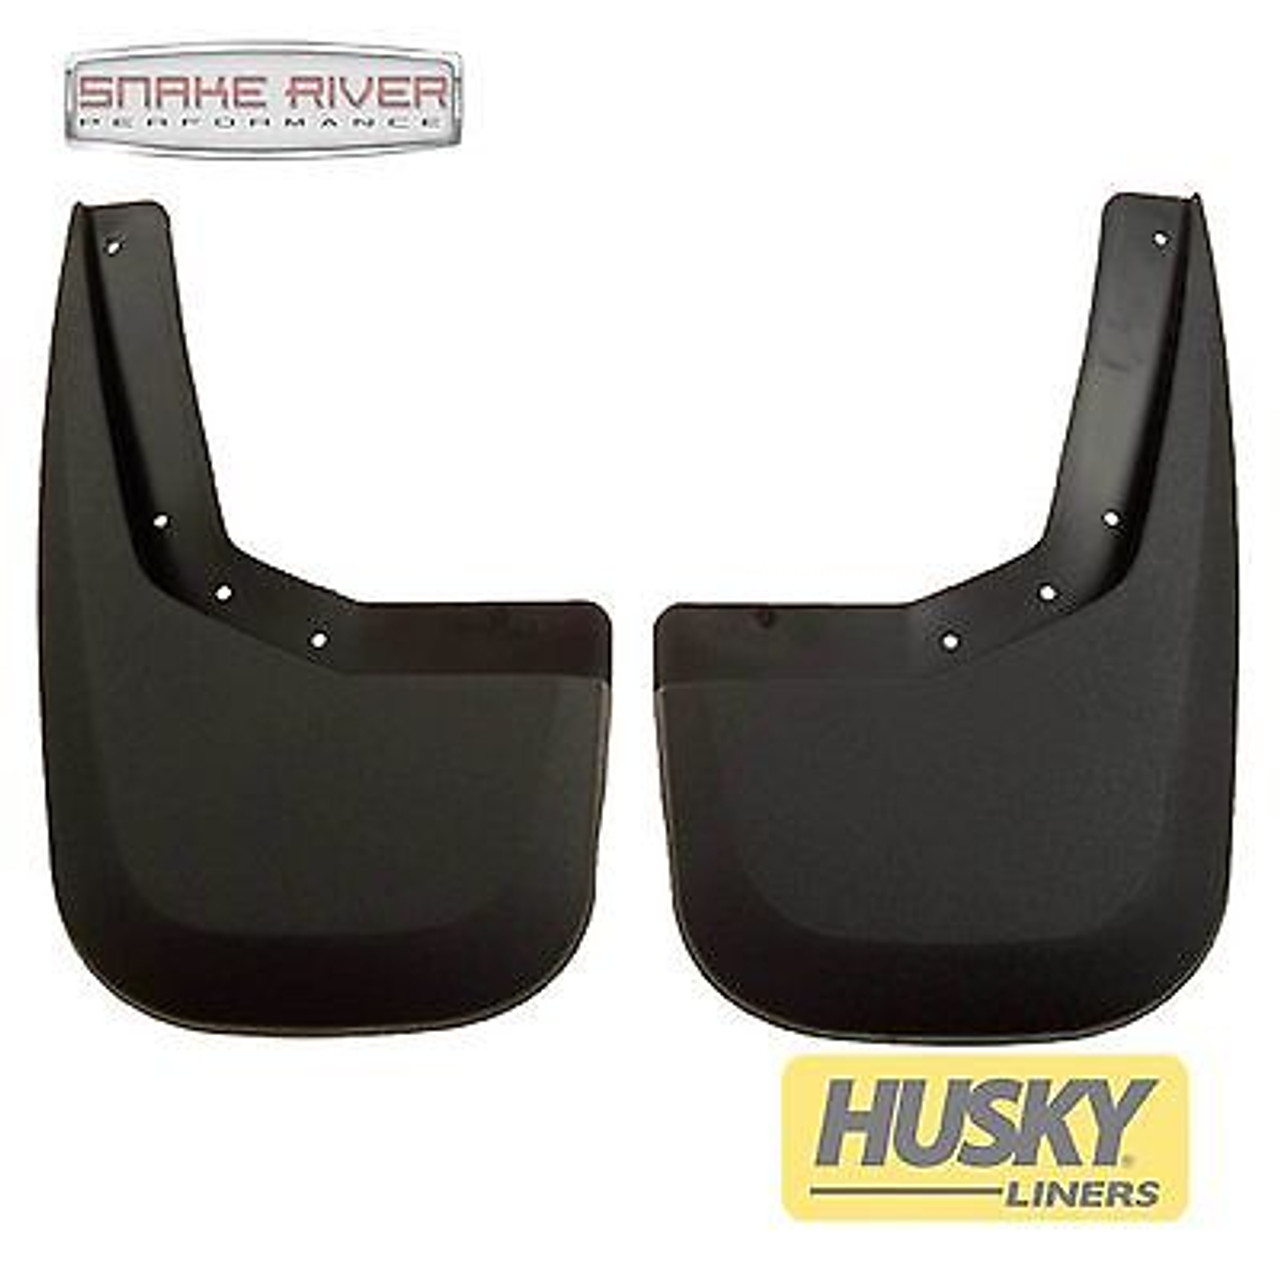 59401 - HUSKY LINERS REAR MUD FLAPS MUD GUARDS FOR 2011-2016 FORD EXPLORER BLACK